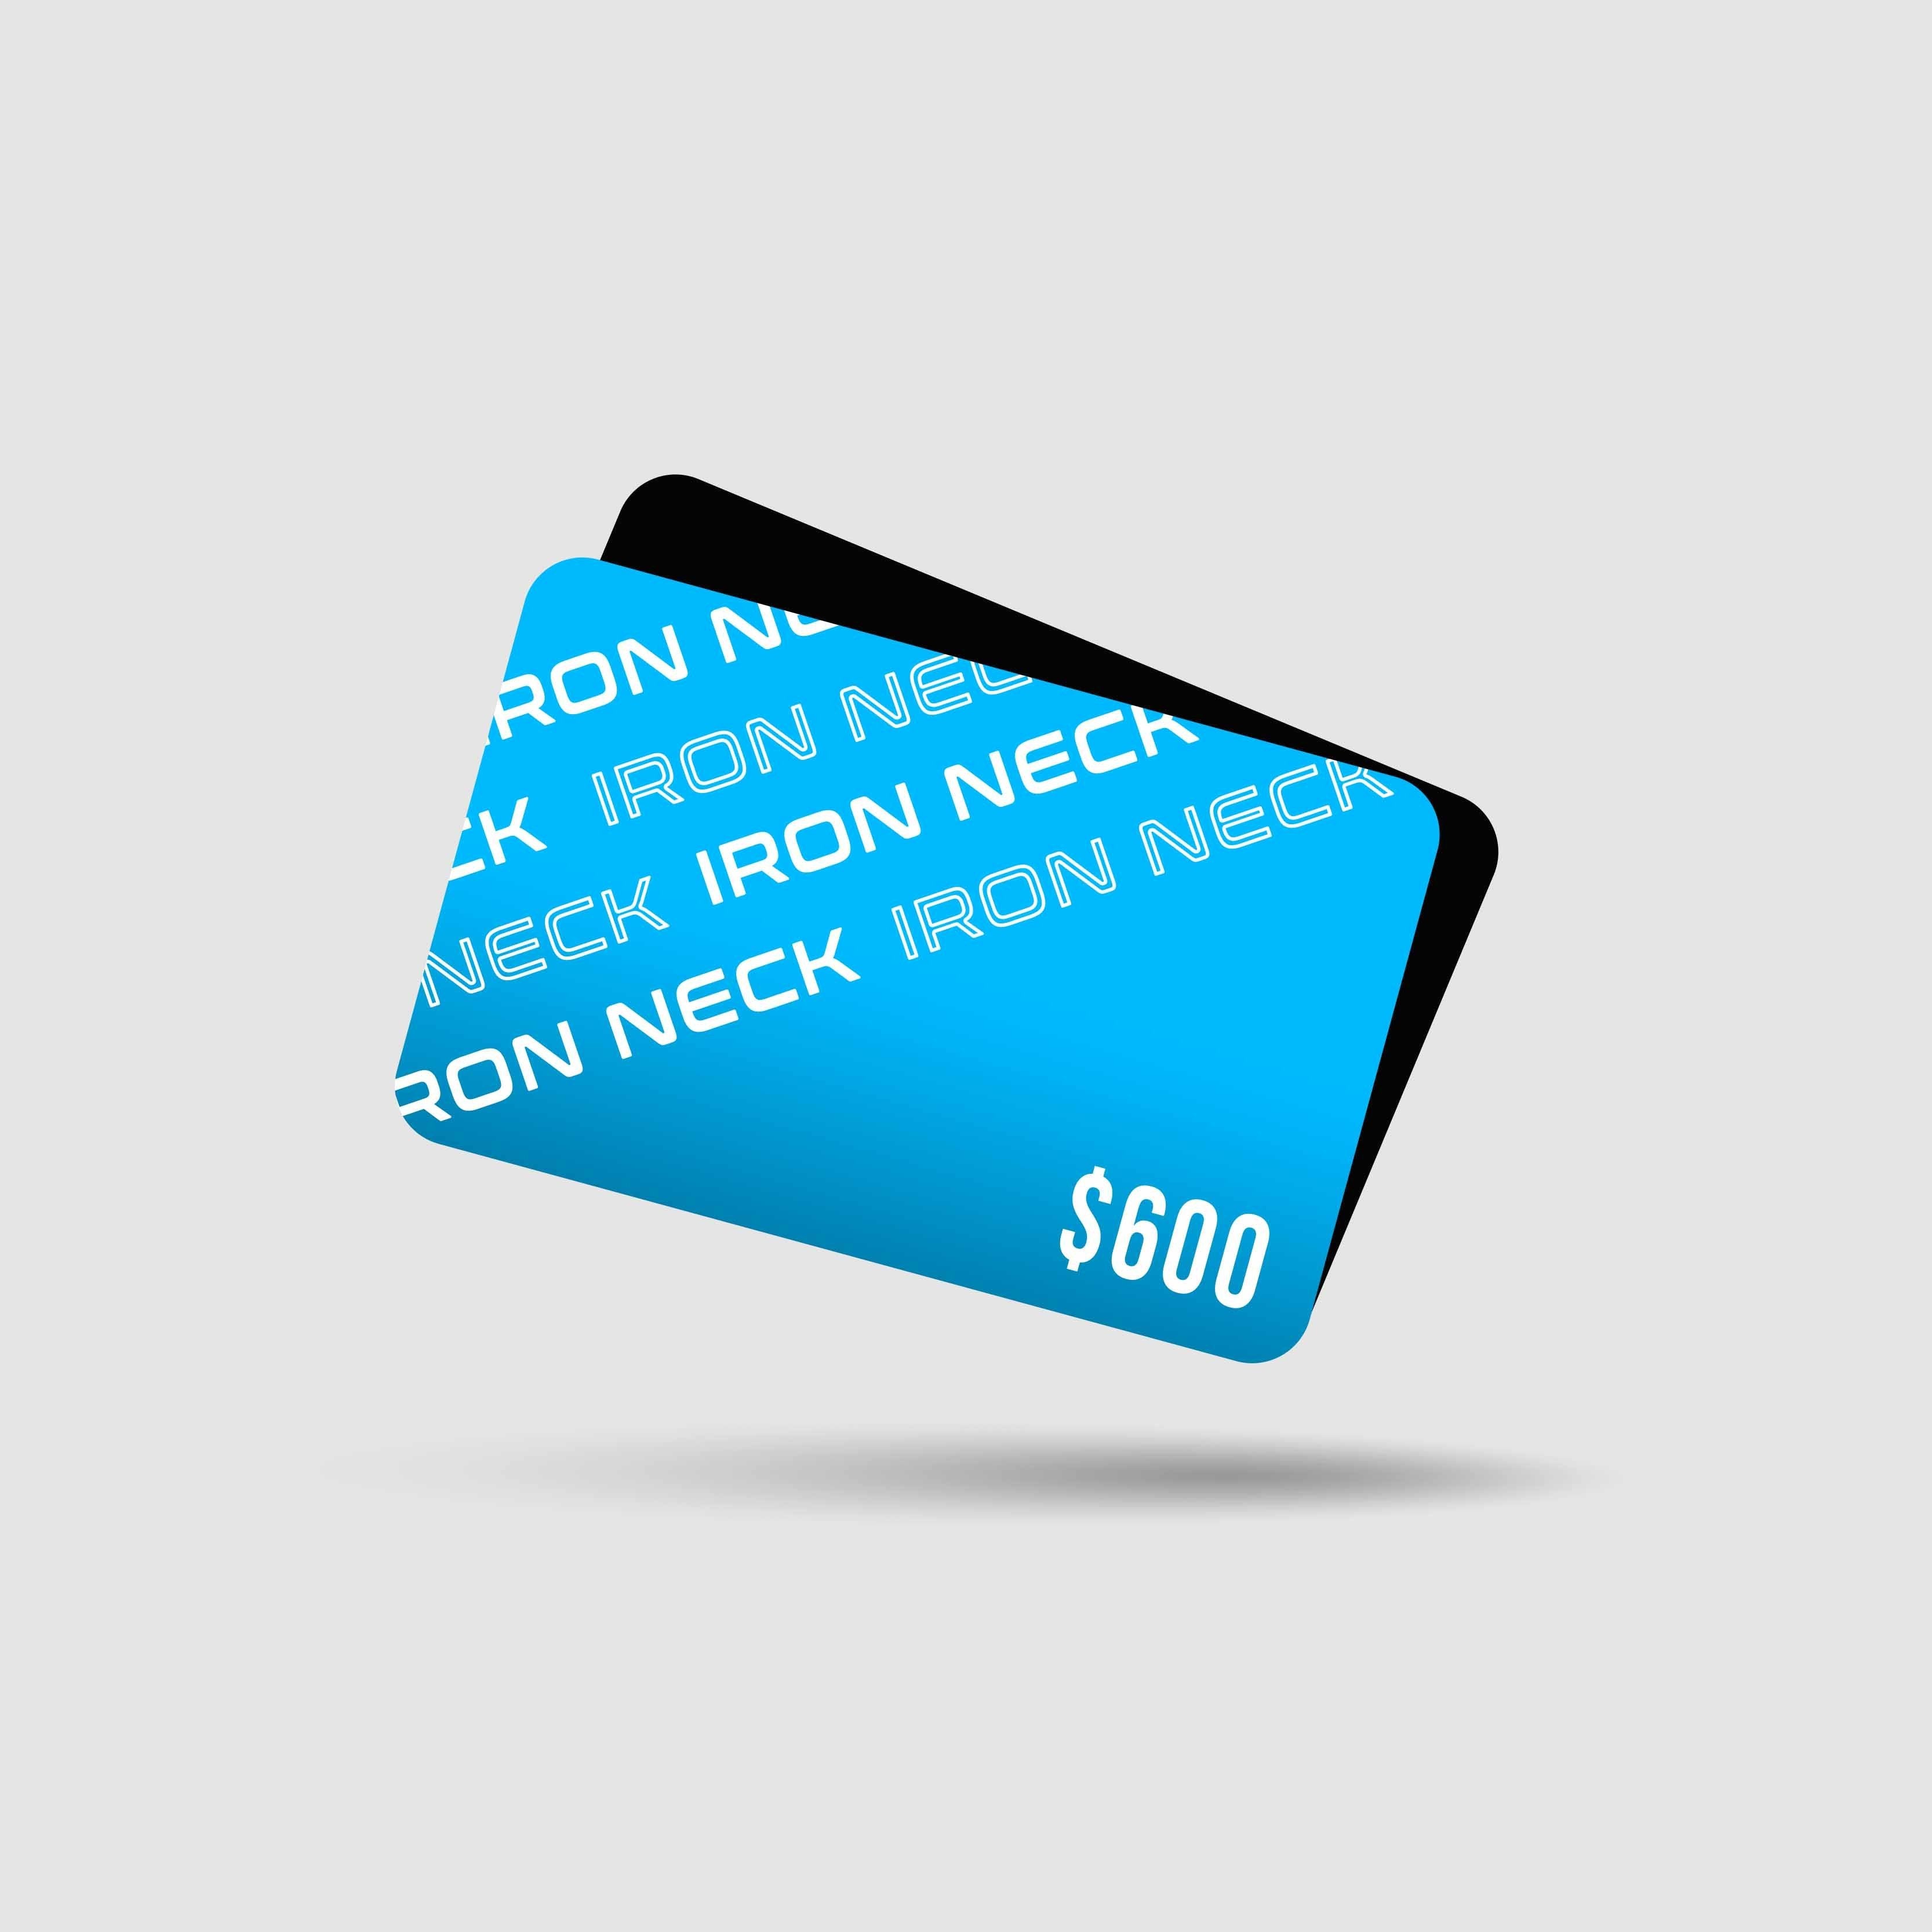 Gift Card Gift Card Iron Neck $600  